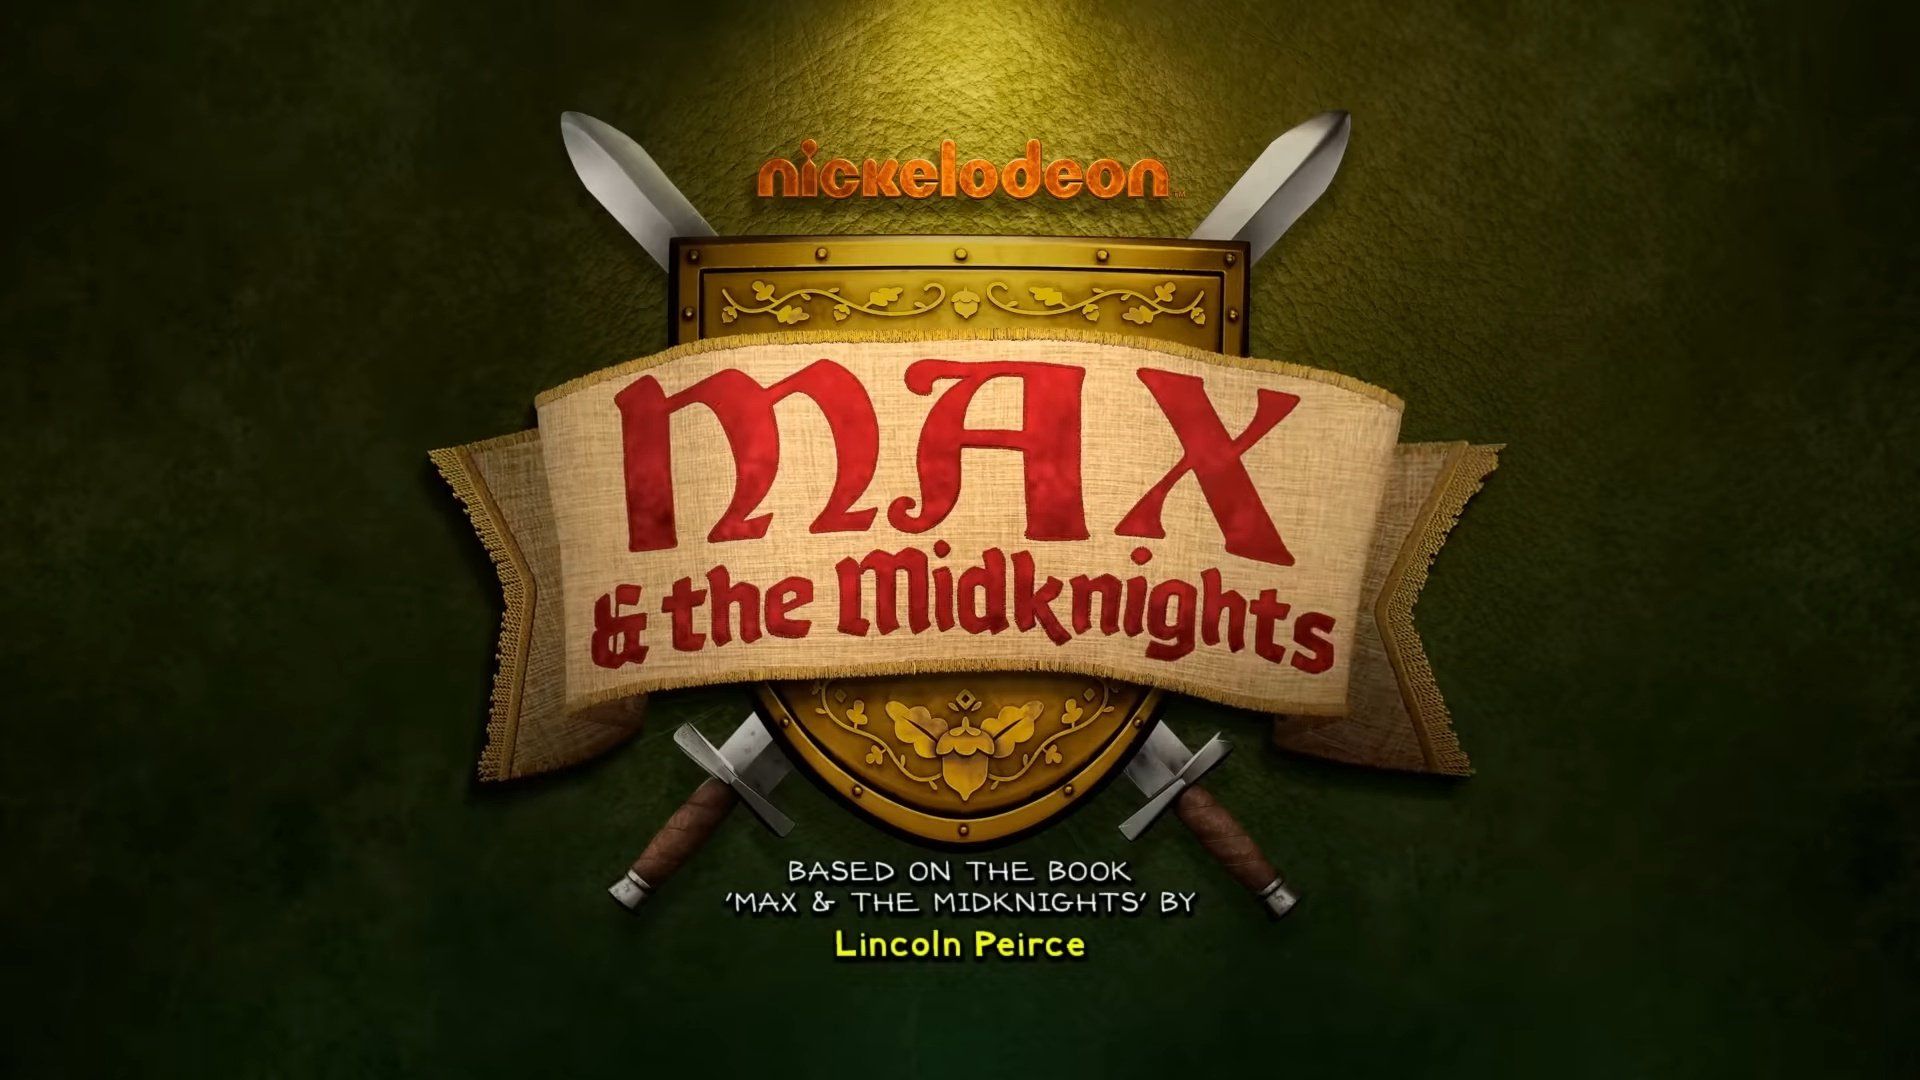 Max & The Midknights